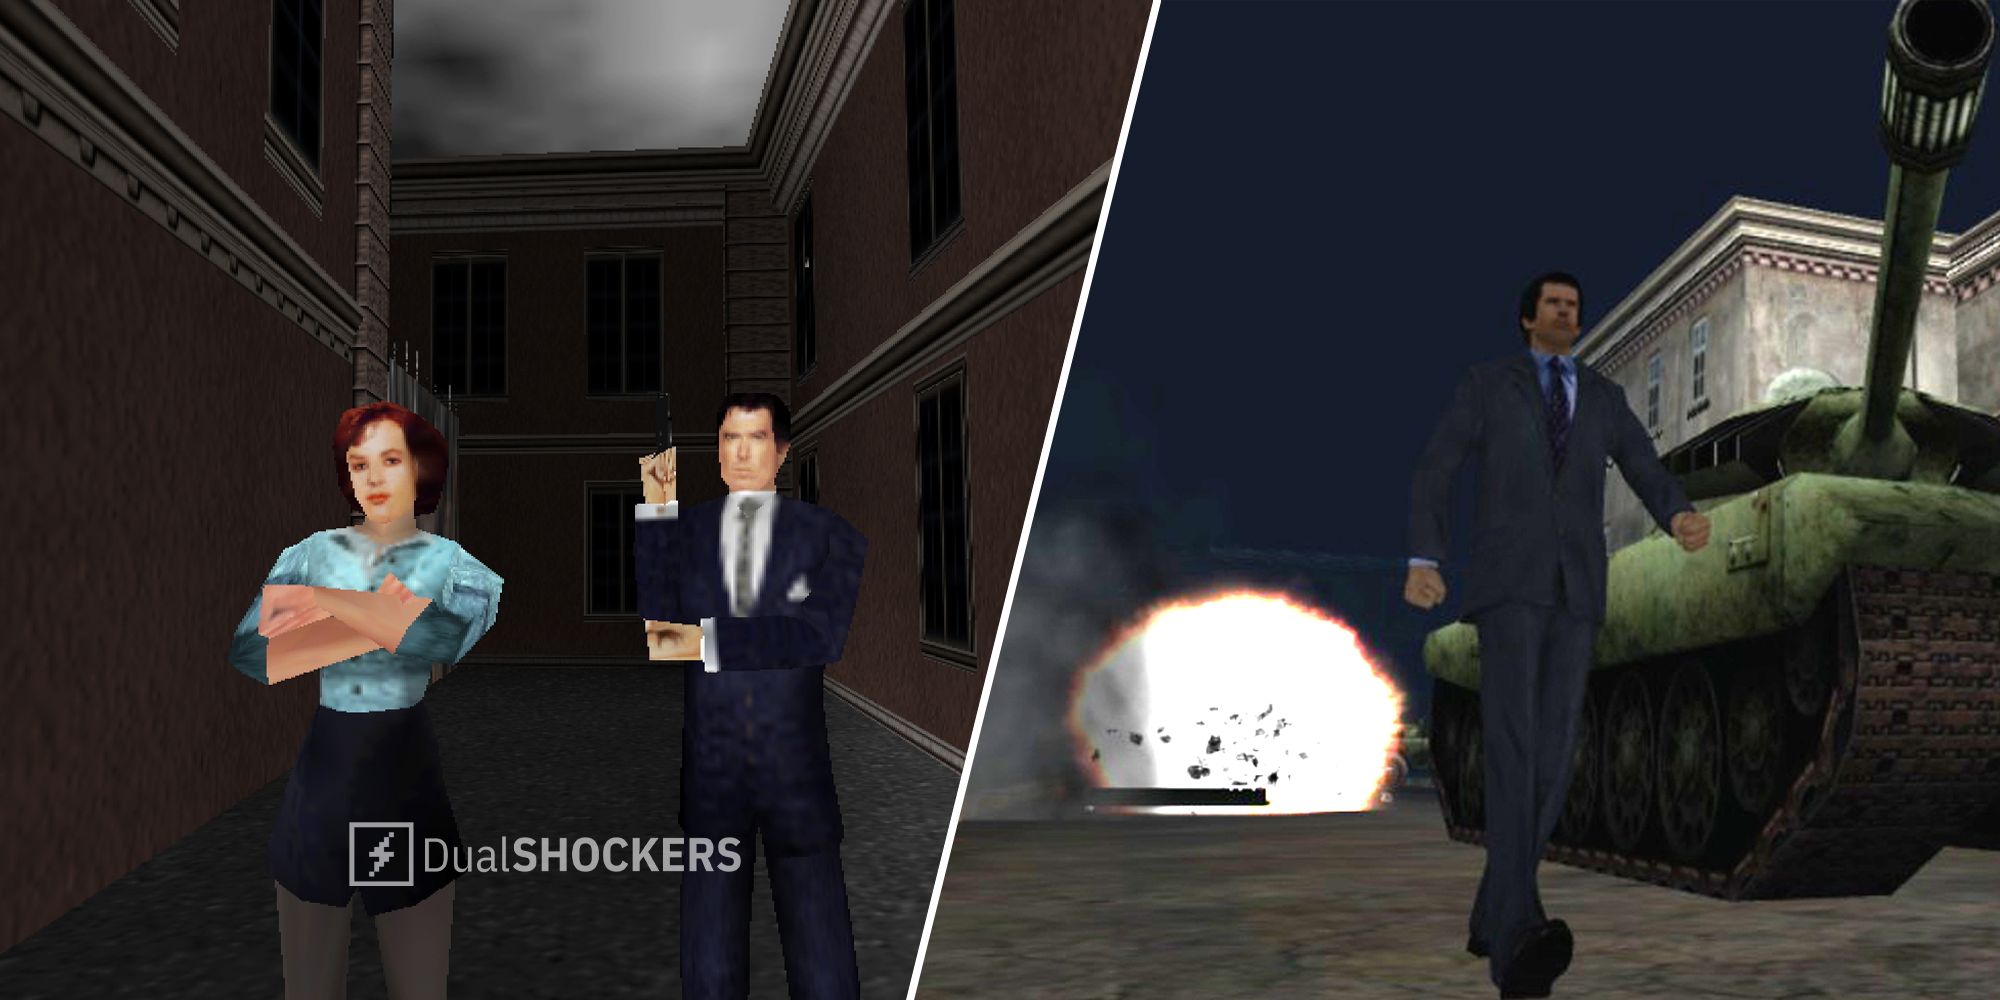 GoldenEye 007 comes to Xbox and Nintendo Switch this week